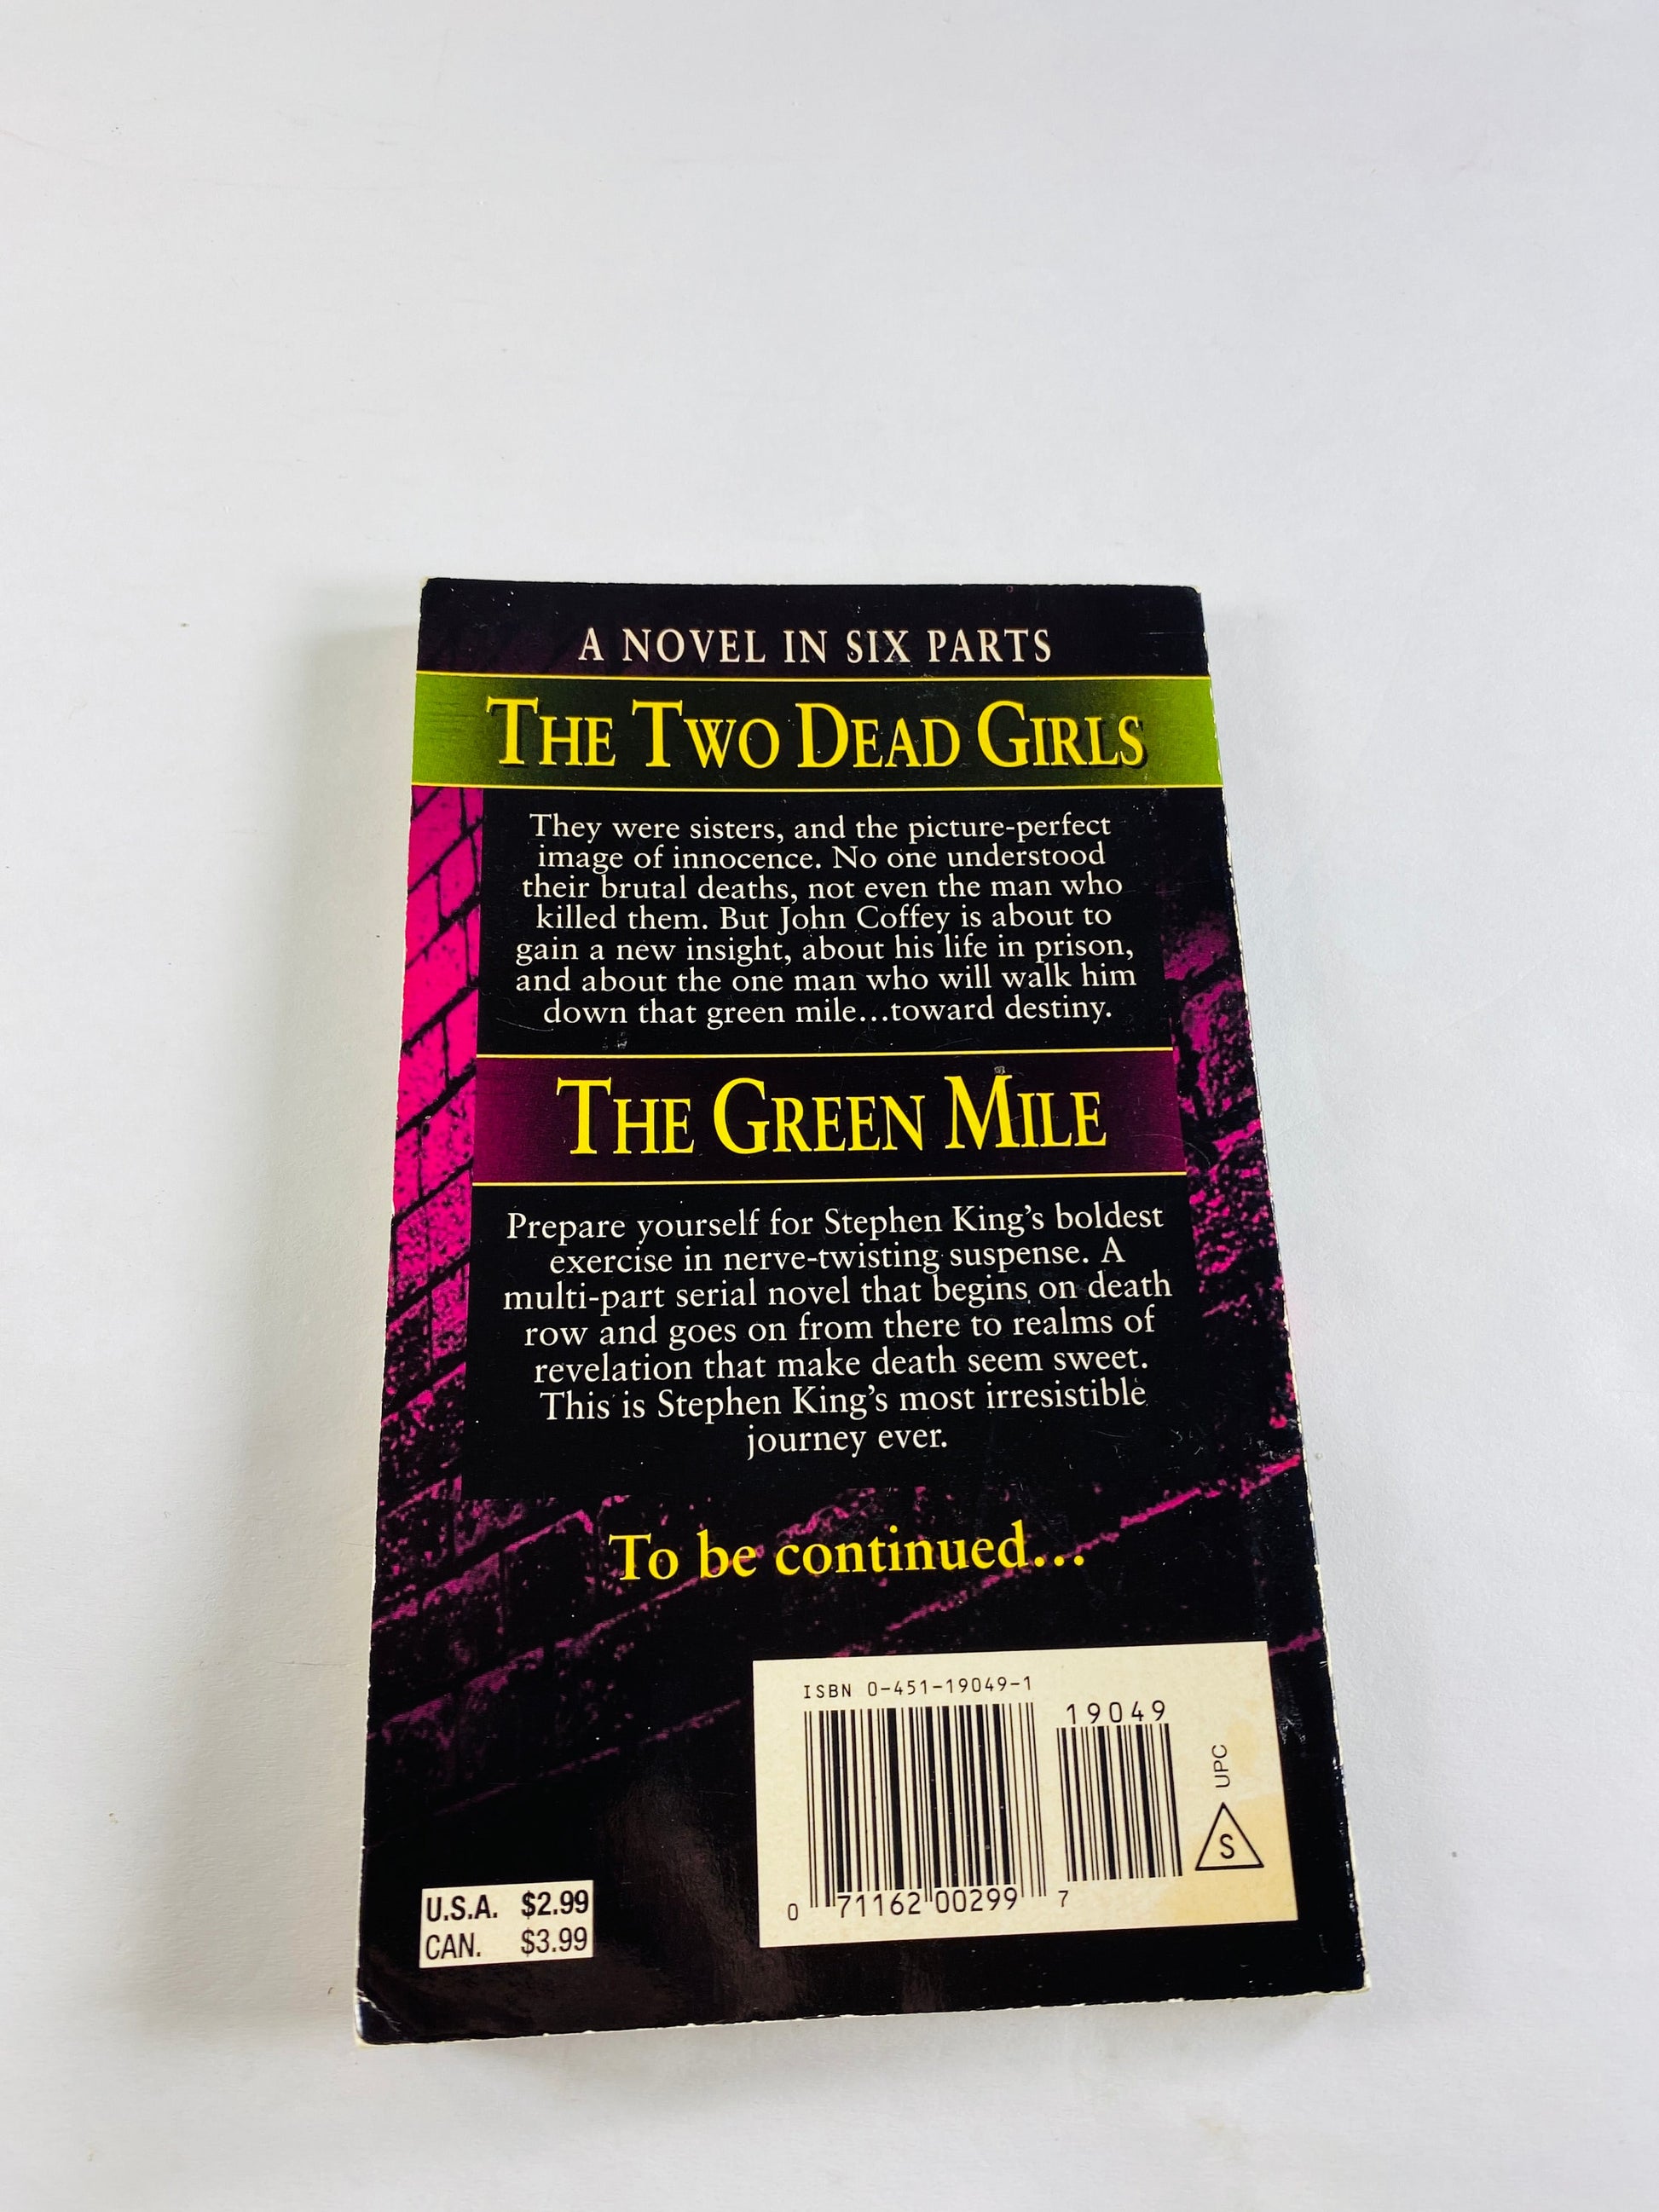 Green Mile Two Dead Girls by Stephen King Vintage paperback book circa 1996 about the a Death Row inmate with healing abilities